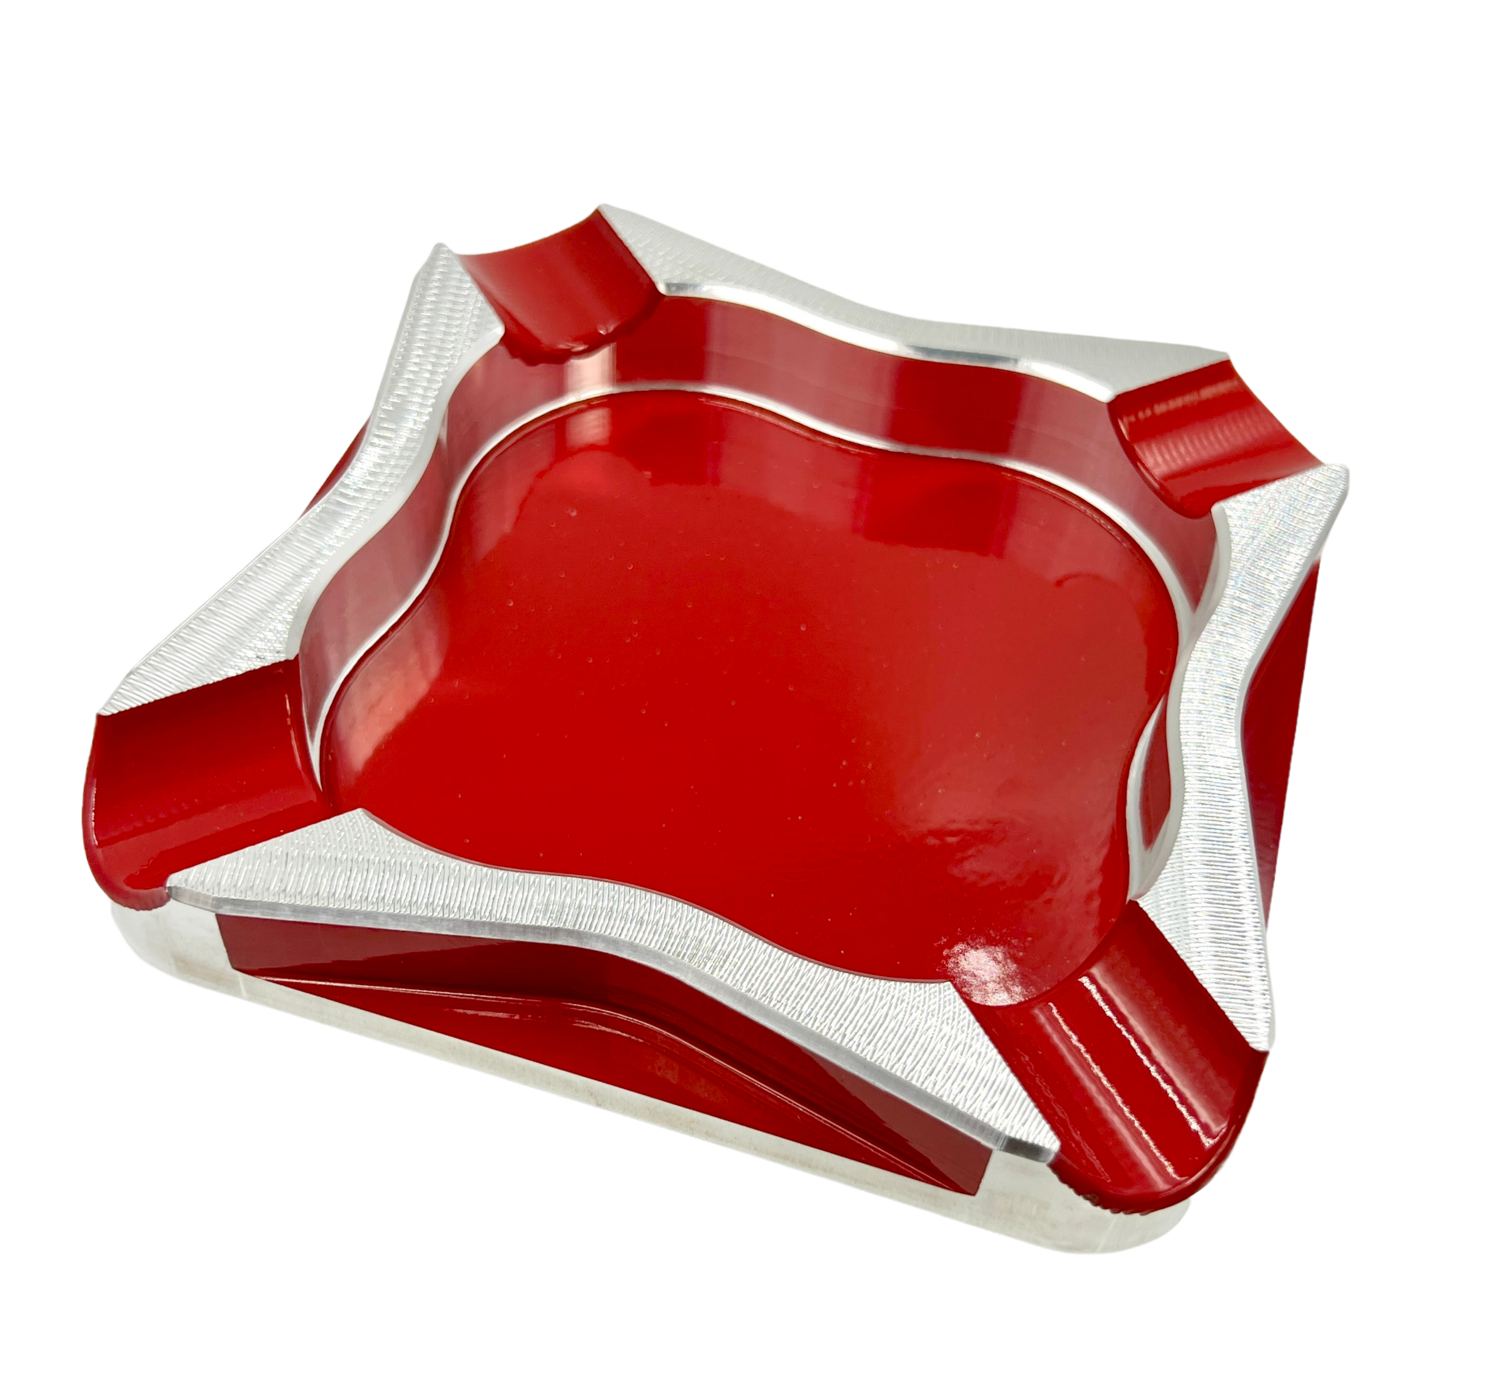 cigar ashtray step down angled side cut four-finger